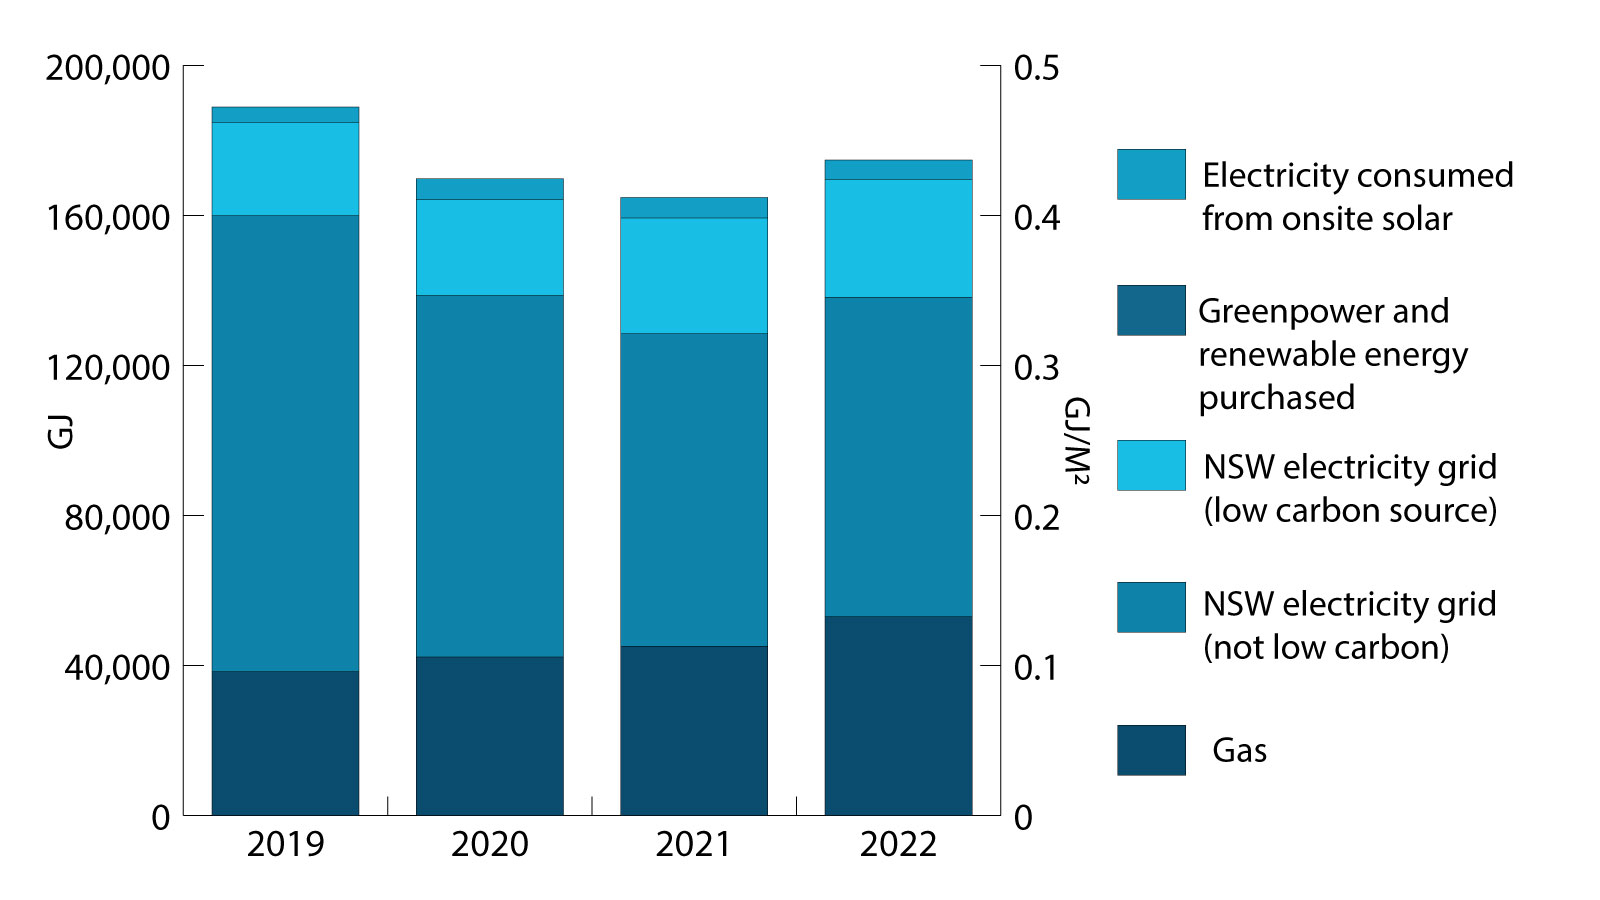 Graph showing energy consumed in GJ and GJ/m2 yearly 2019 to 2022.